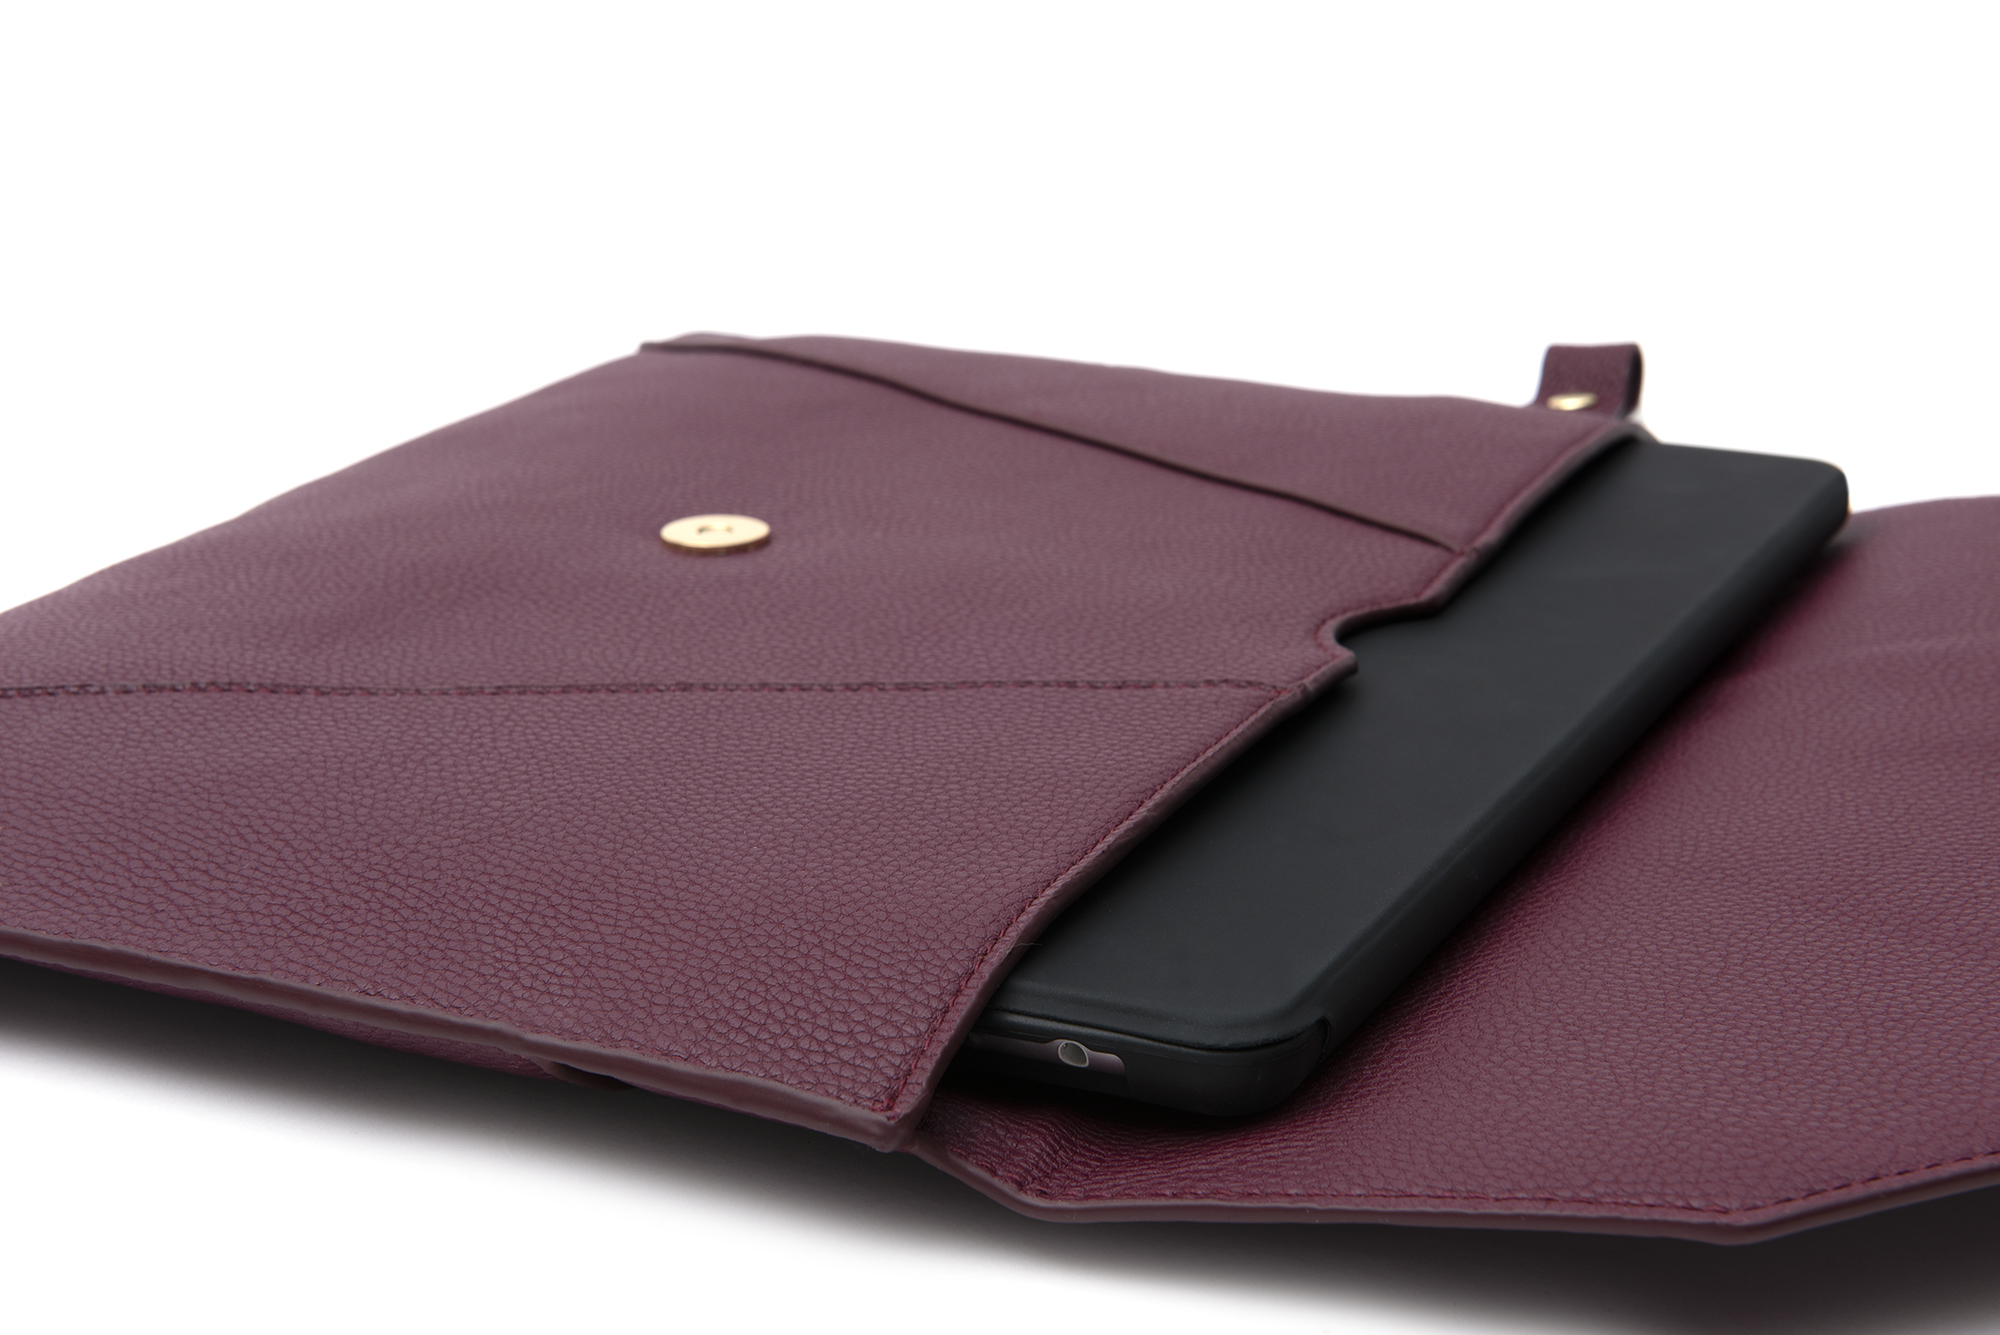 MOTILE Vegan Leather Commuter Laptop Tote with 10,000 mAh Qi Certified Wireless Powerbank, Cabernet - image 2 of 8